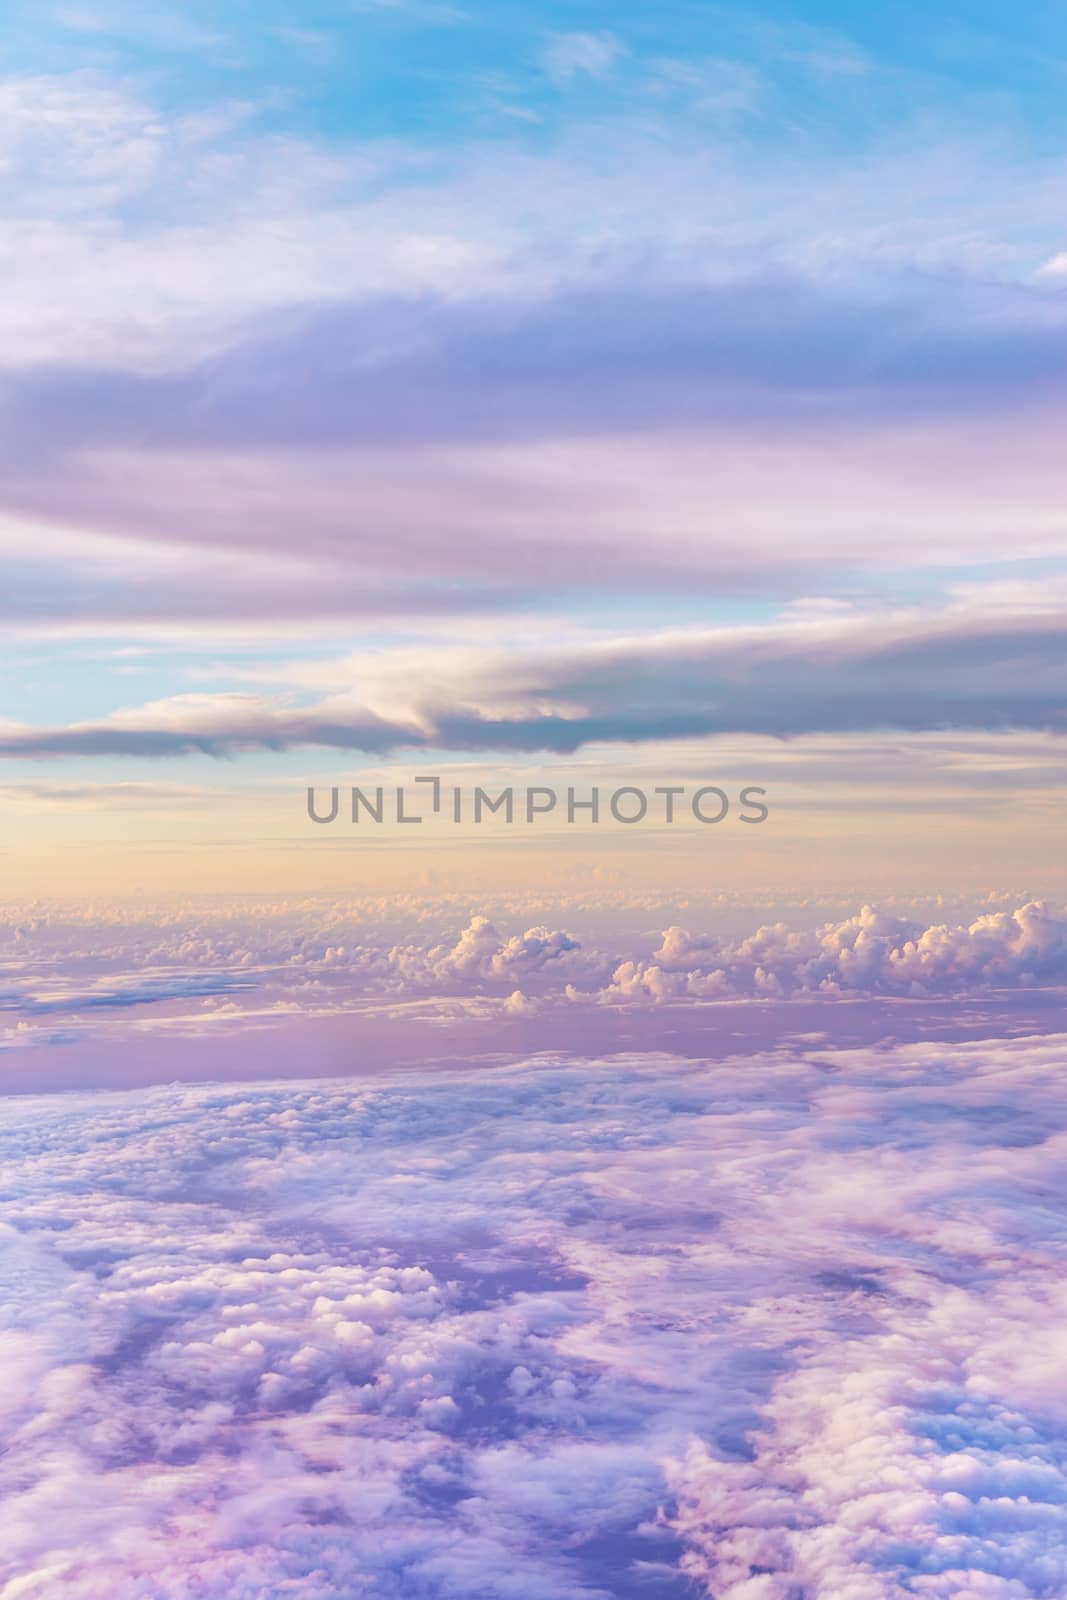 dramatic and spiritual cloudscape with dramatic clouds reflecting the rays of sunset light.